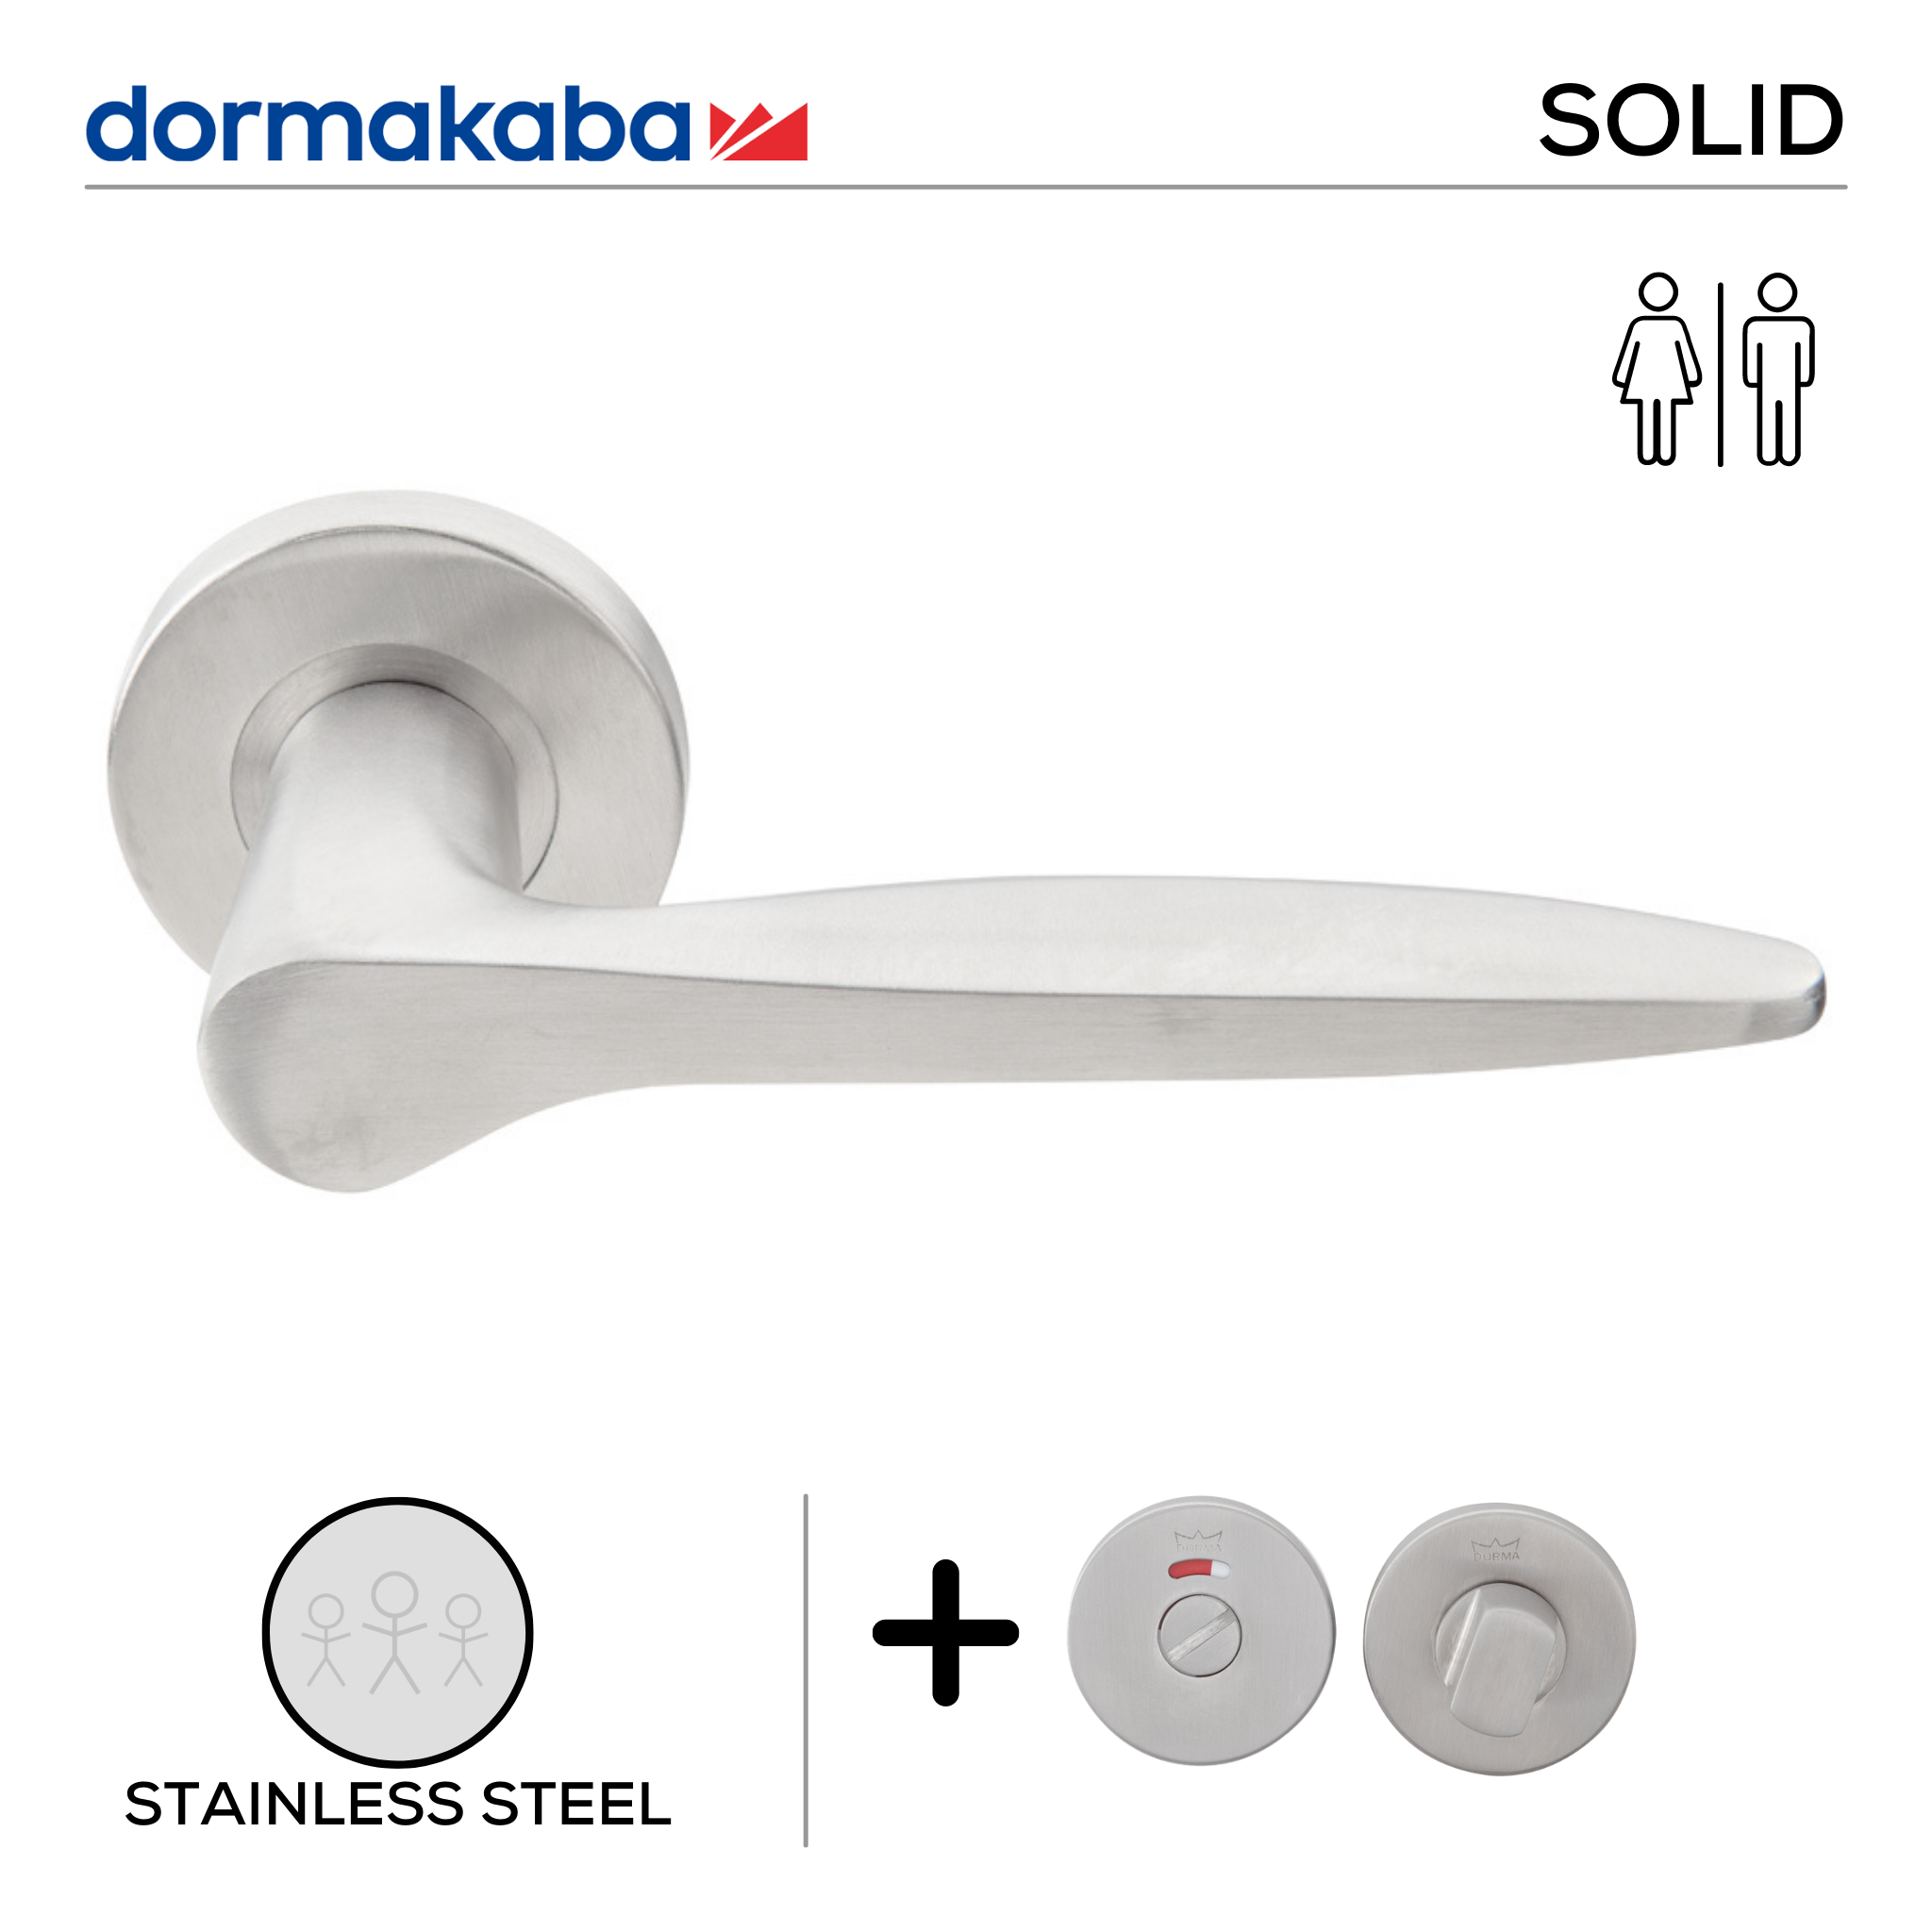 SH 825 Bathroom W/C, Lever Handles, Solid, On Round Rose, With Bathroom (WC) Indicator Set - DWC 005, 145mm (l), Stainless Steel, DORMAKABA